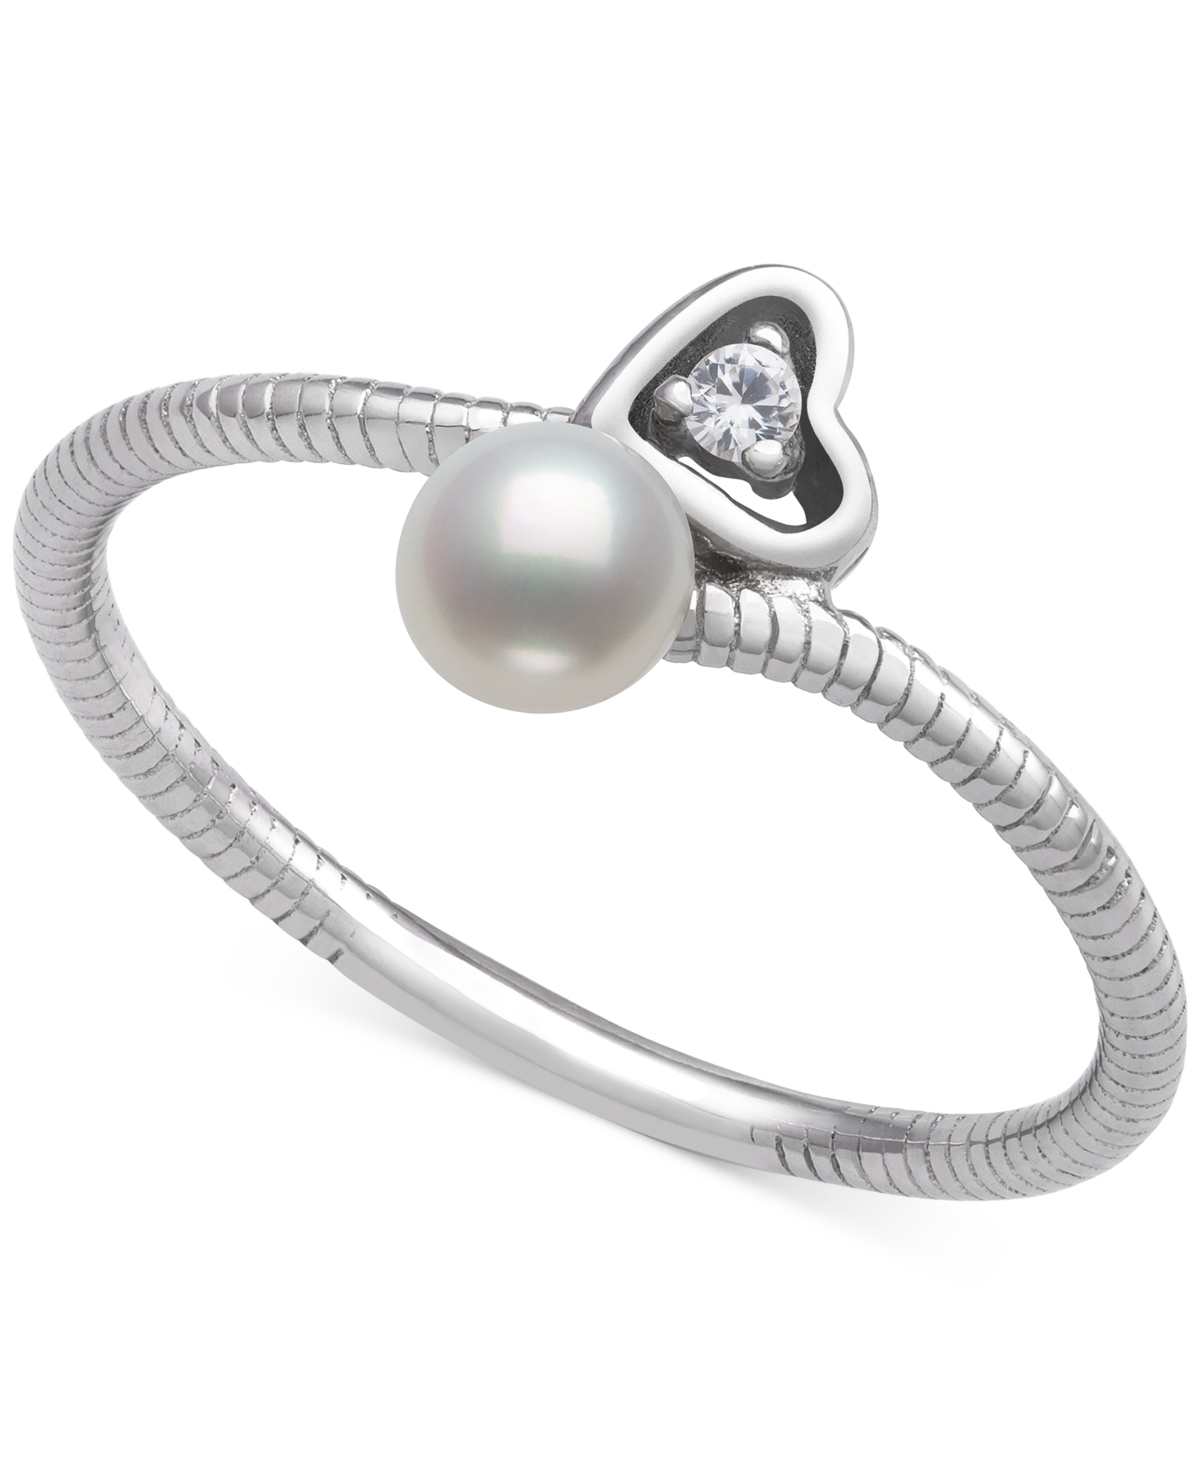 Belle de Mer Cultured Freshwater Button Pearl (4mm) & Lab-Created White Sapphire (1/20 ct. t.w.) Heart Bypass Ring